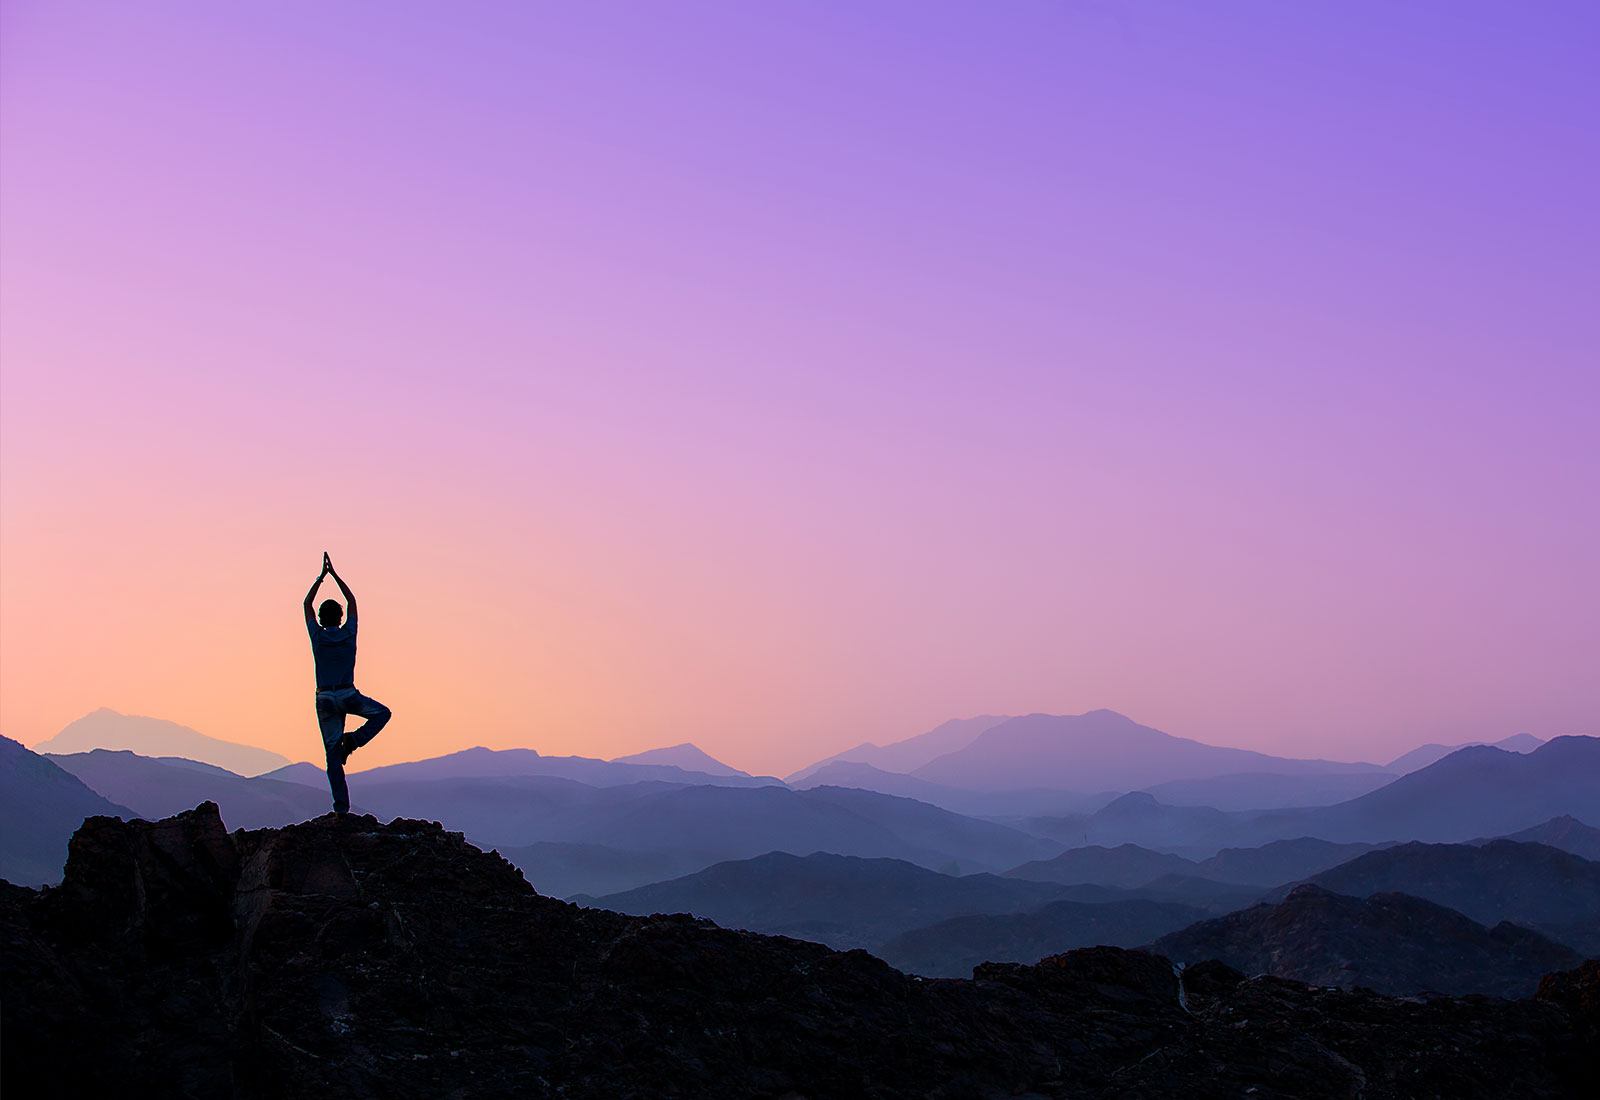 A person doing yoga on a mountain hill